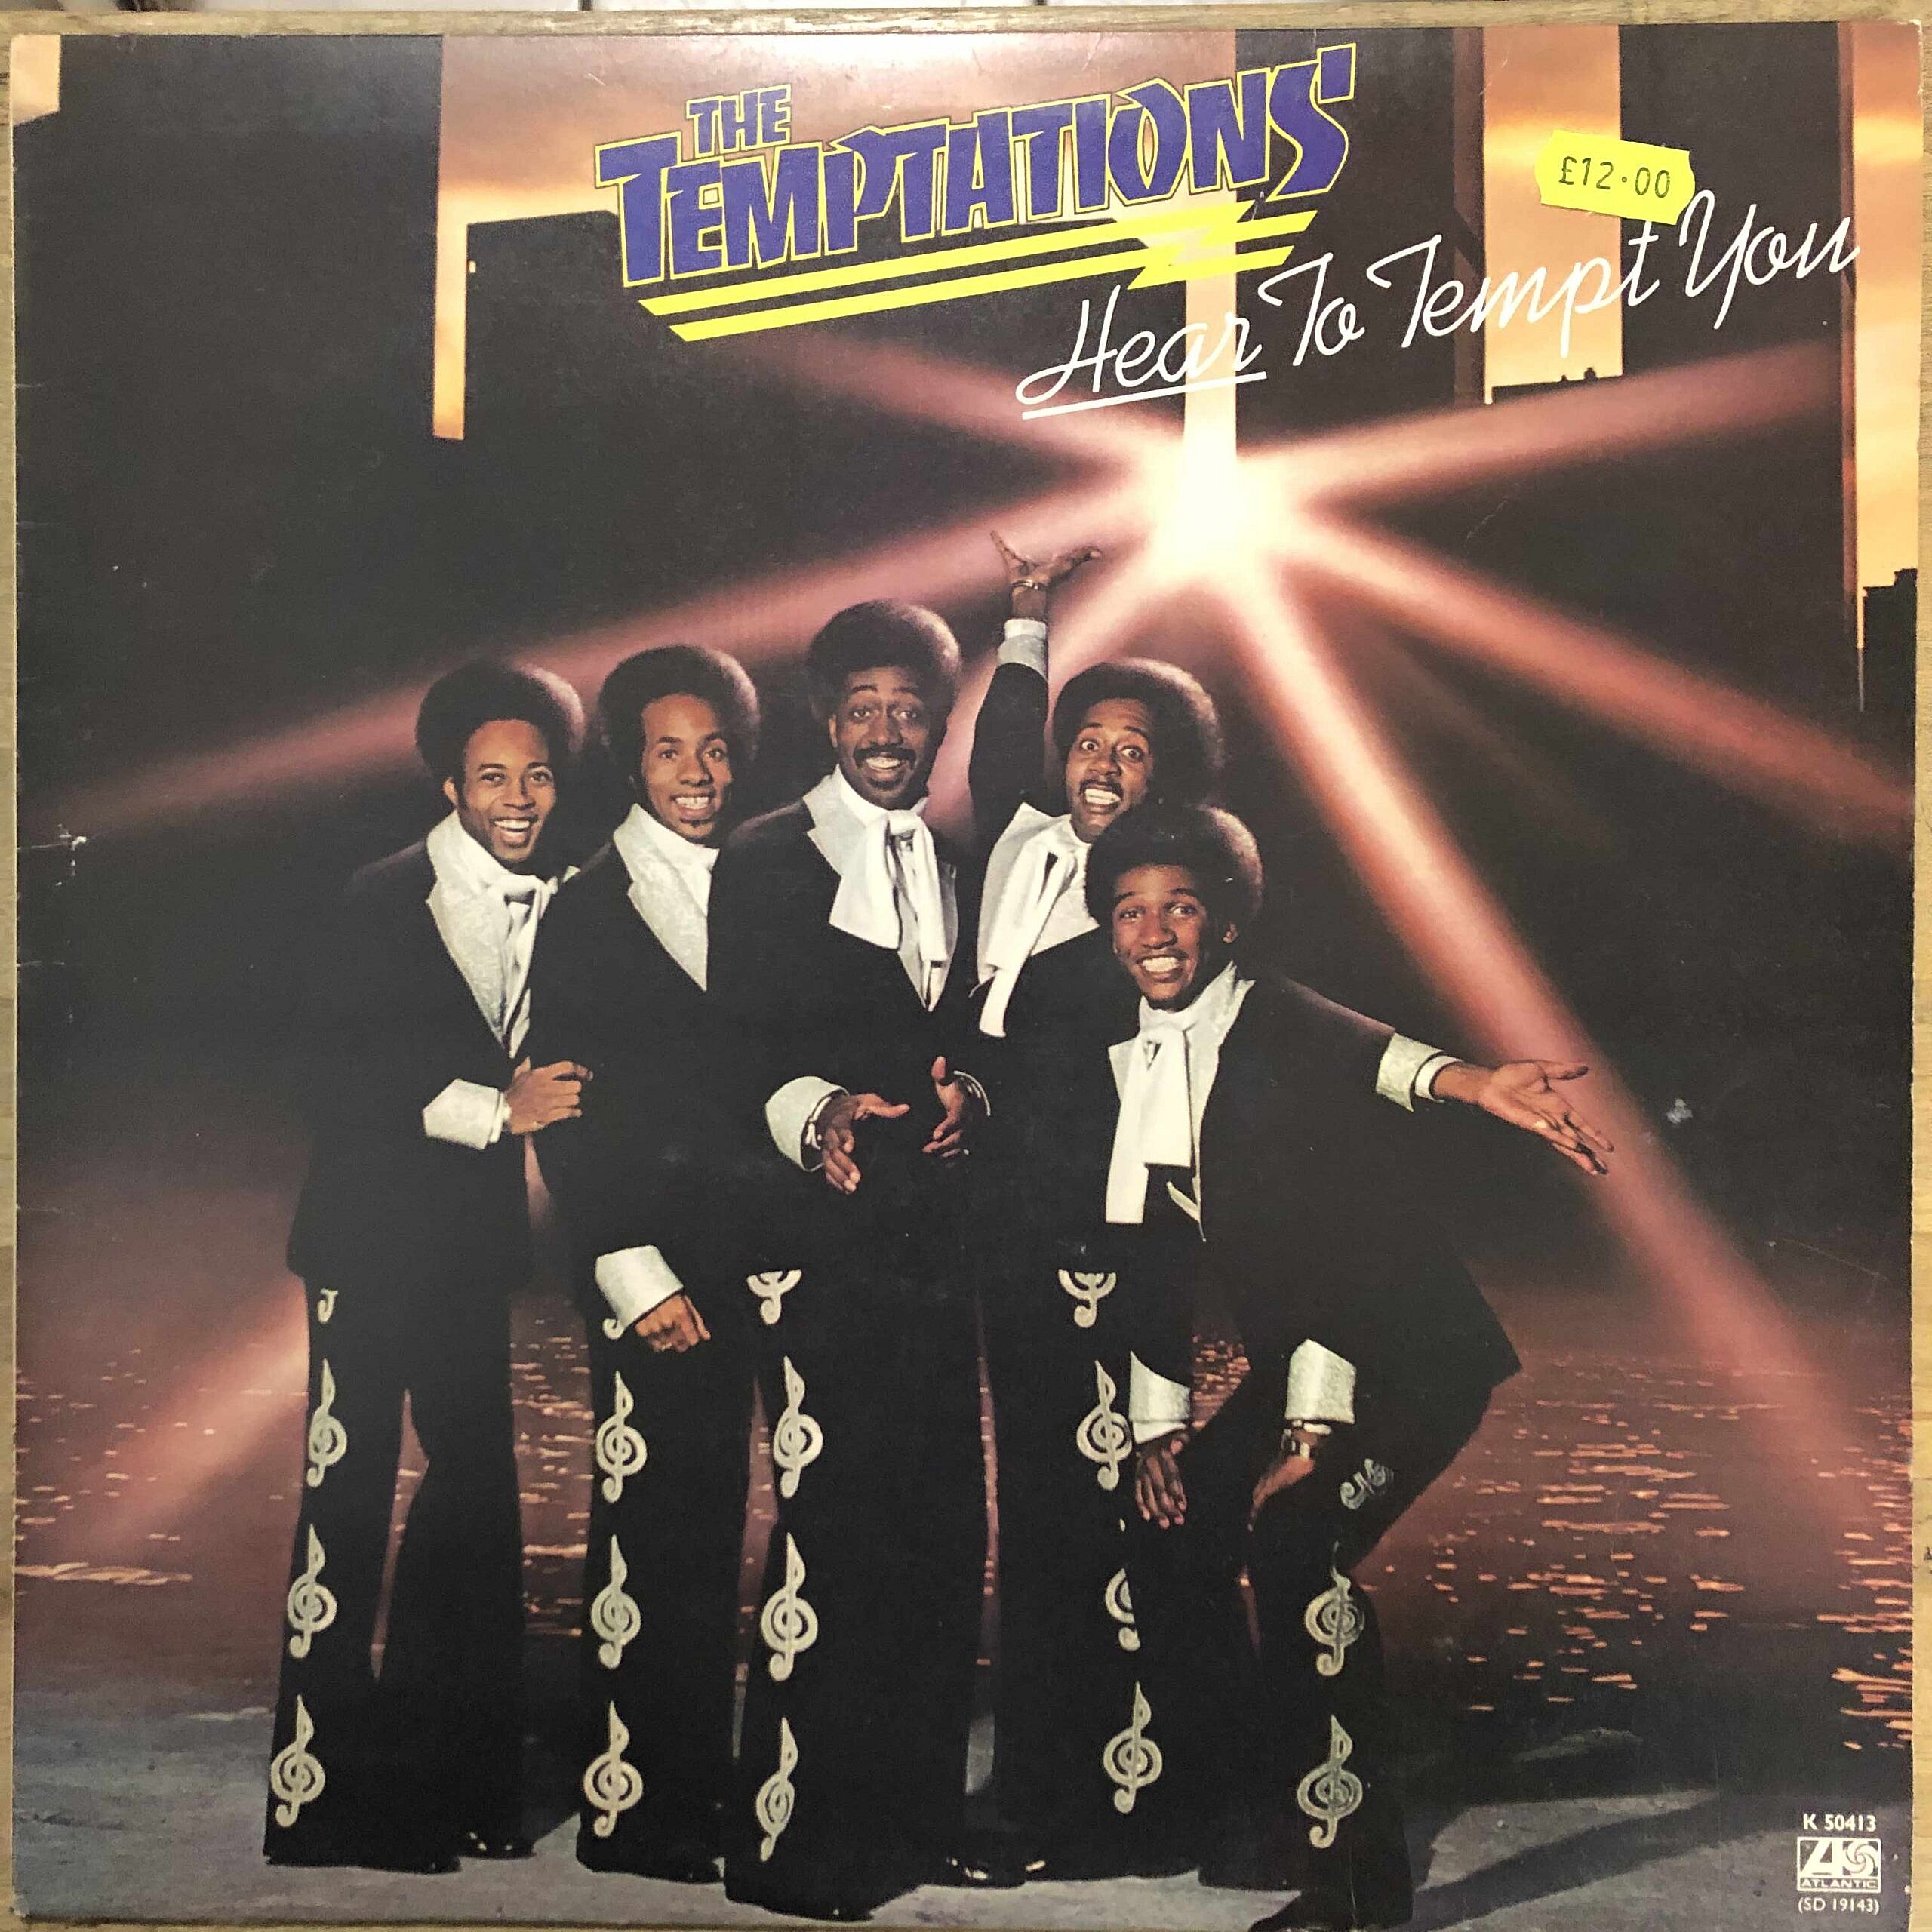 The Temptations Greatest Hits Volume 3